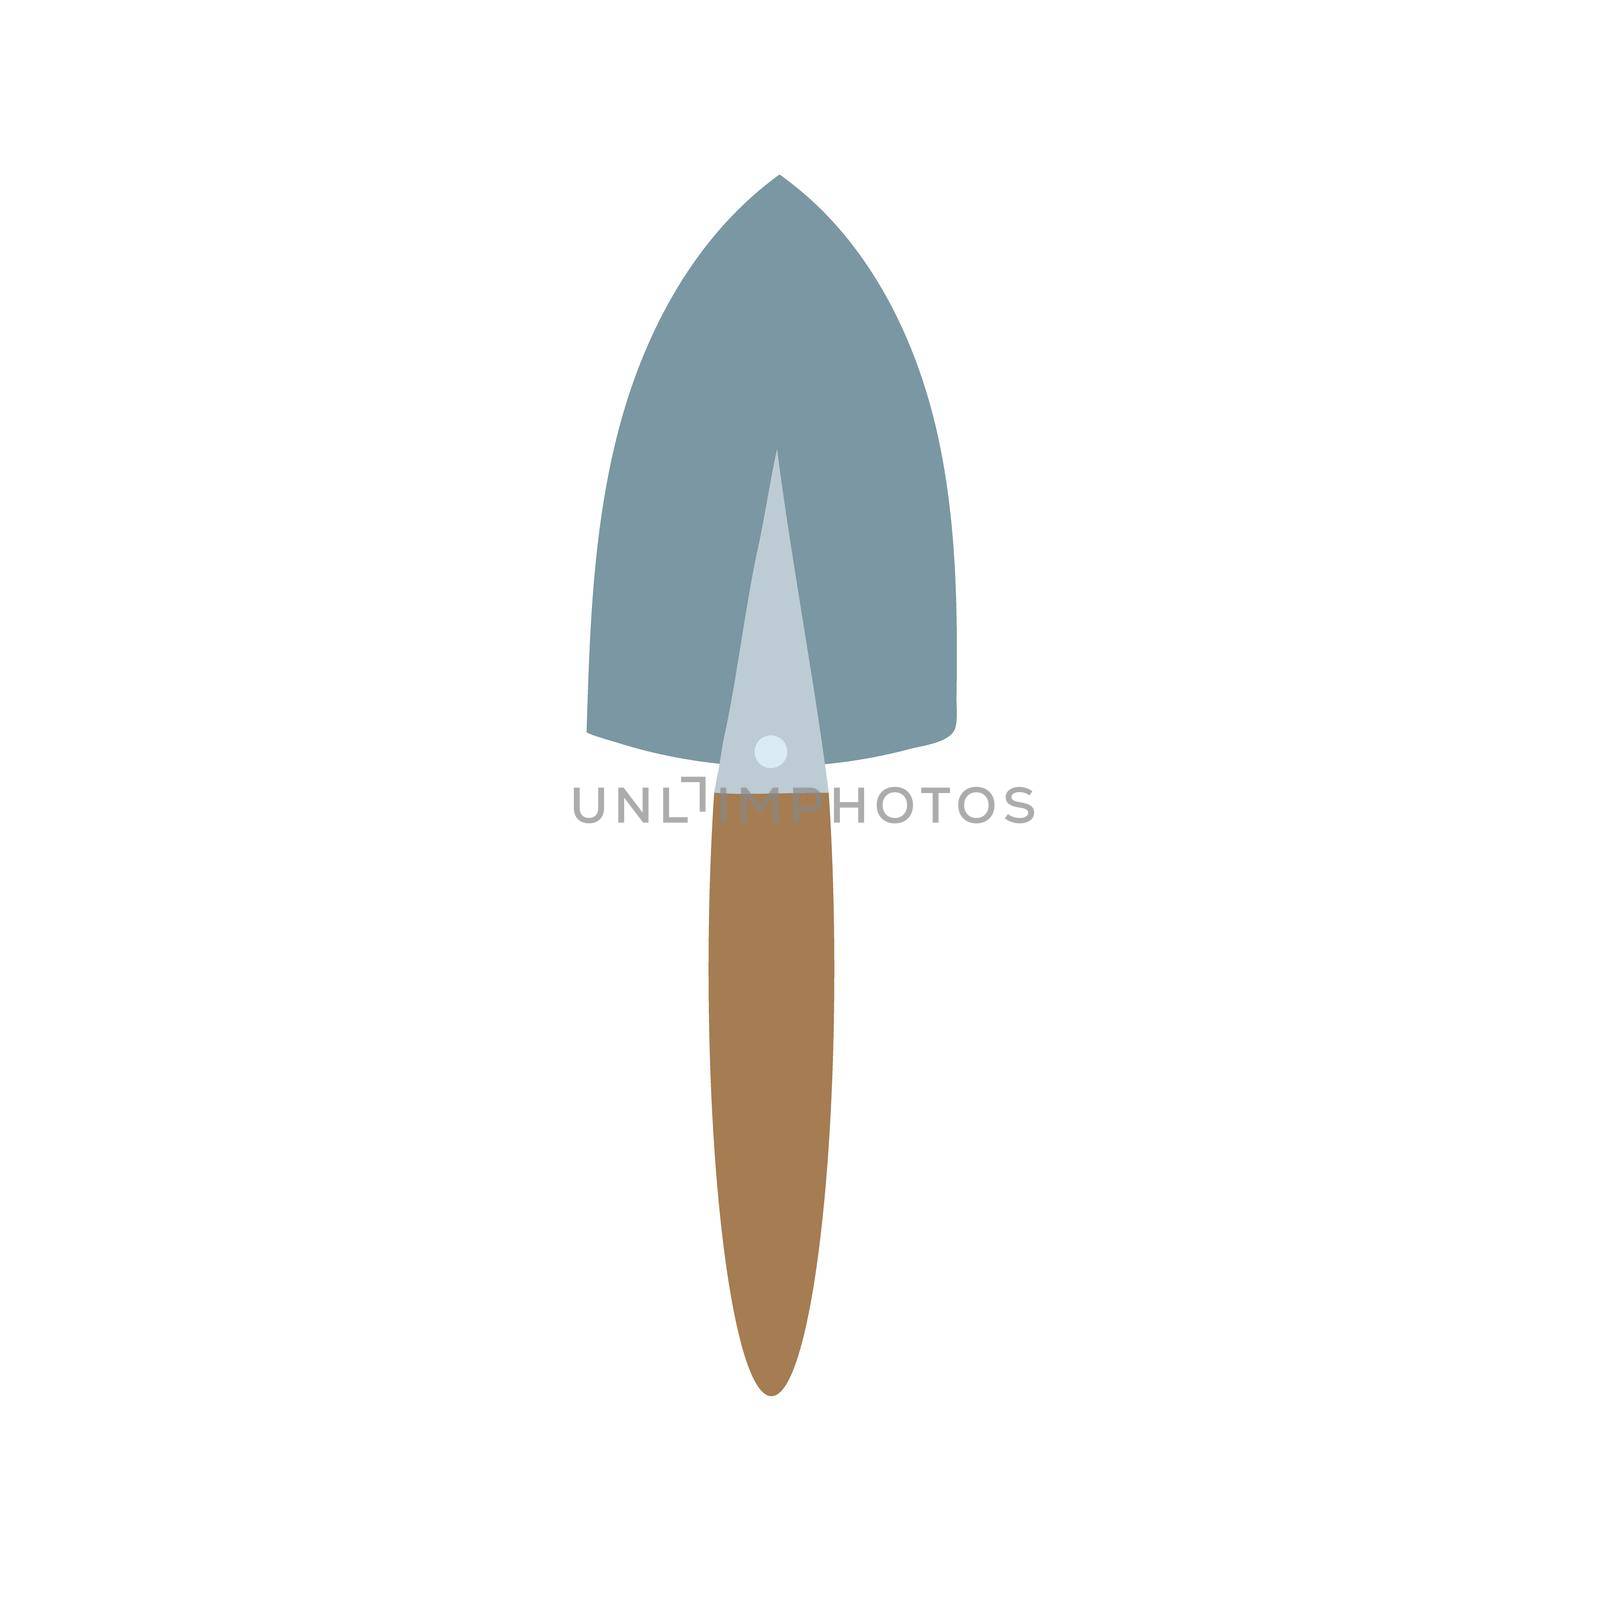 Garden tool vector illustration on white background. Equipment for gardening - simple hand drawn style